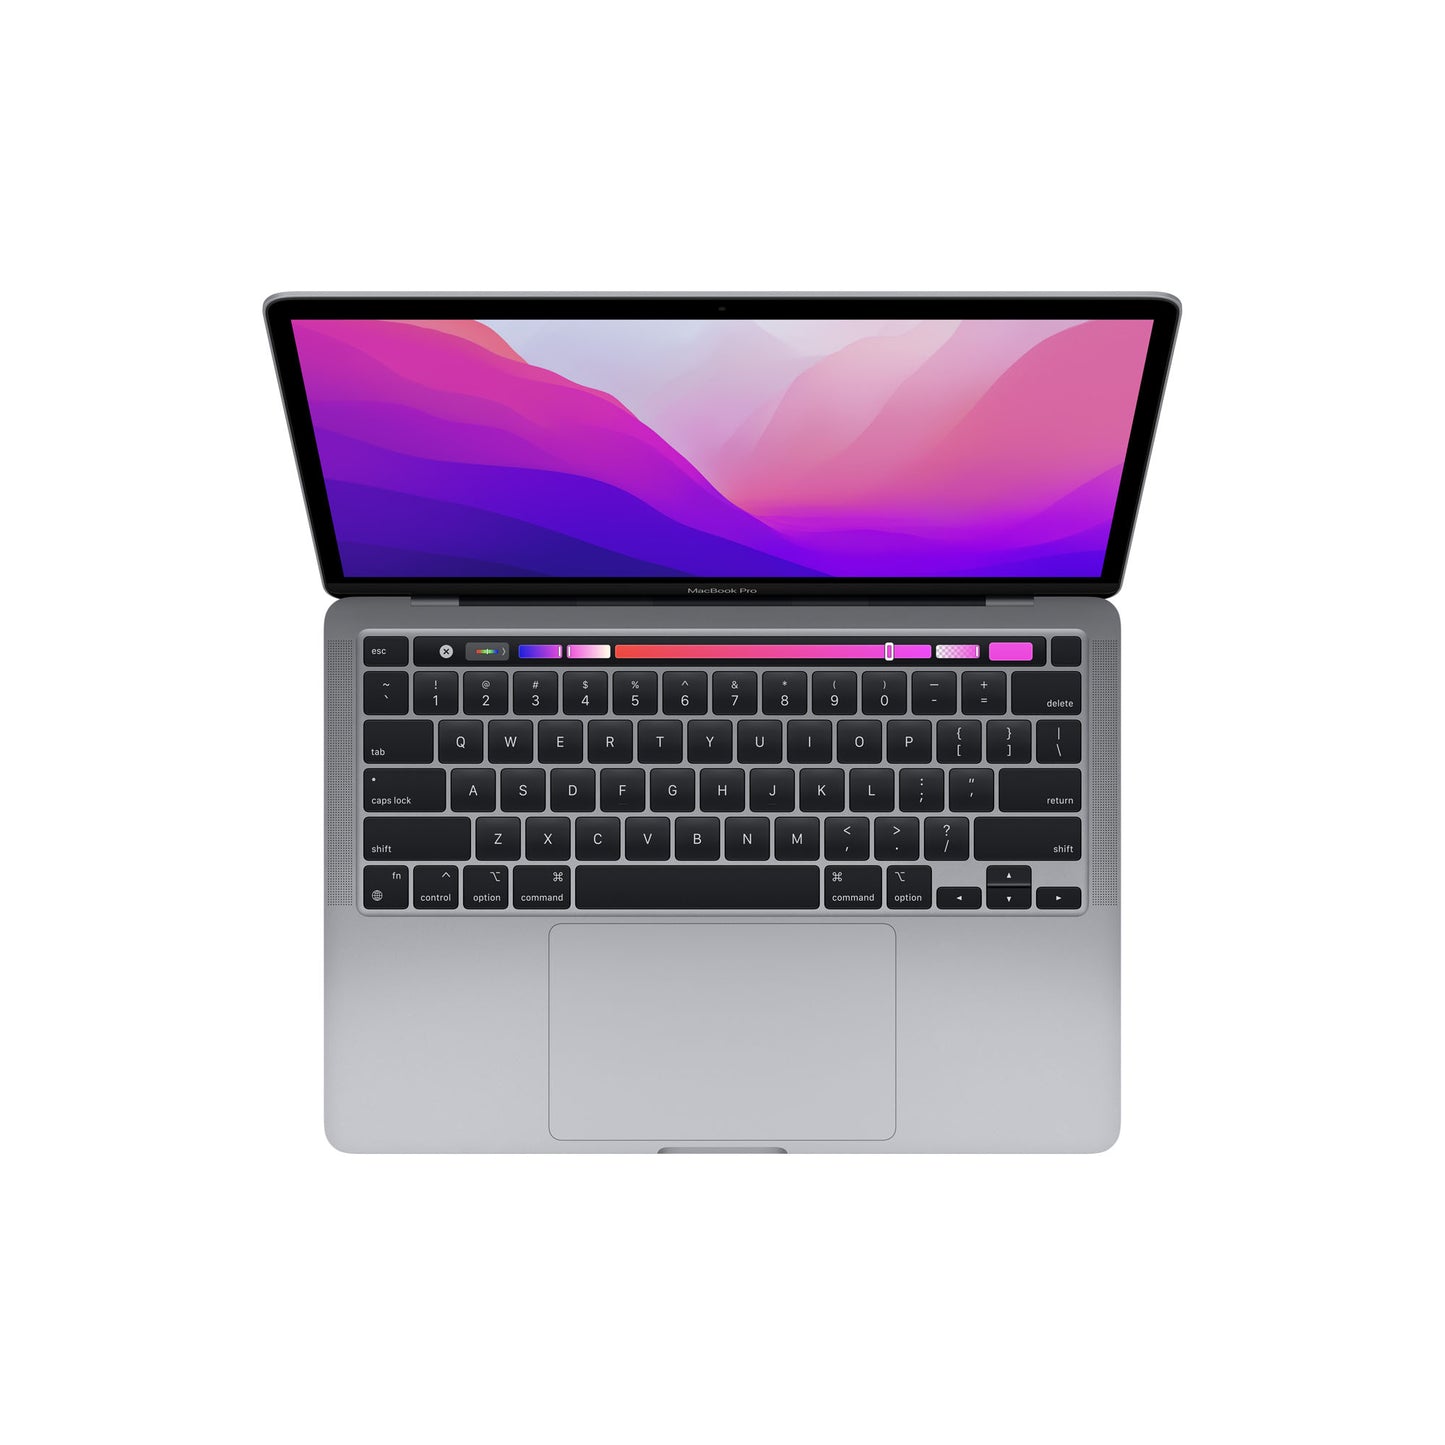 13-inch MacBook Pro: Apple M2 chip with 8-core CPU and 10-core GPU 256GB SSD - Space Grey